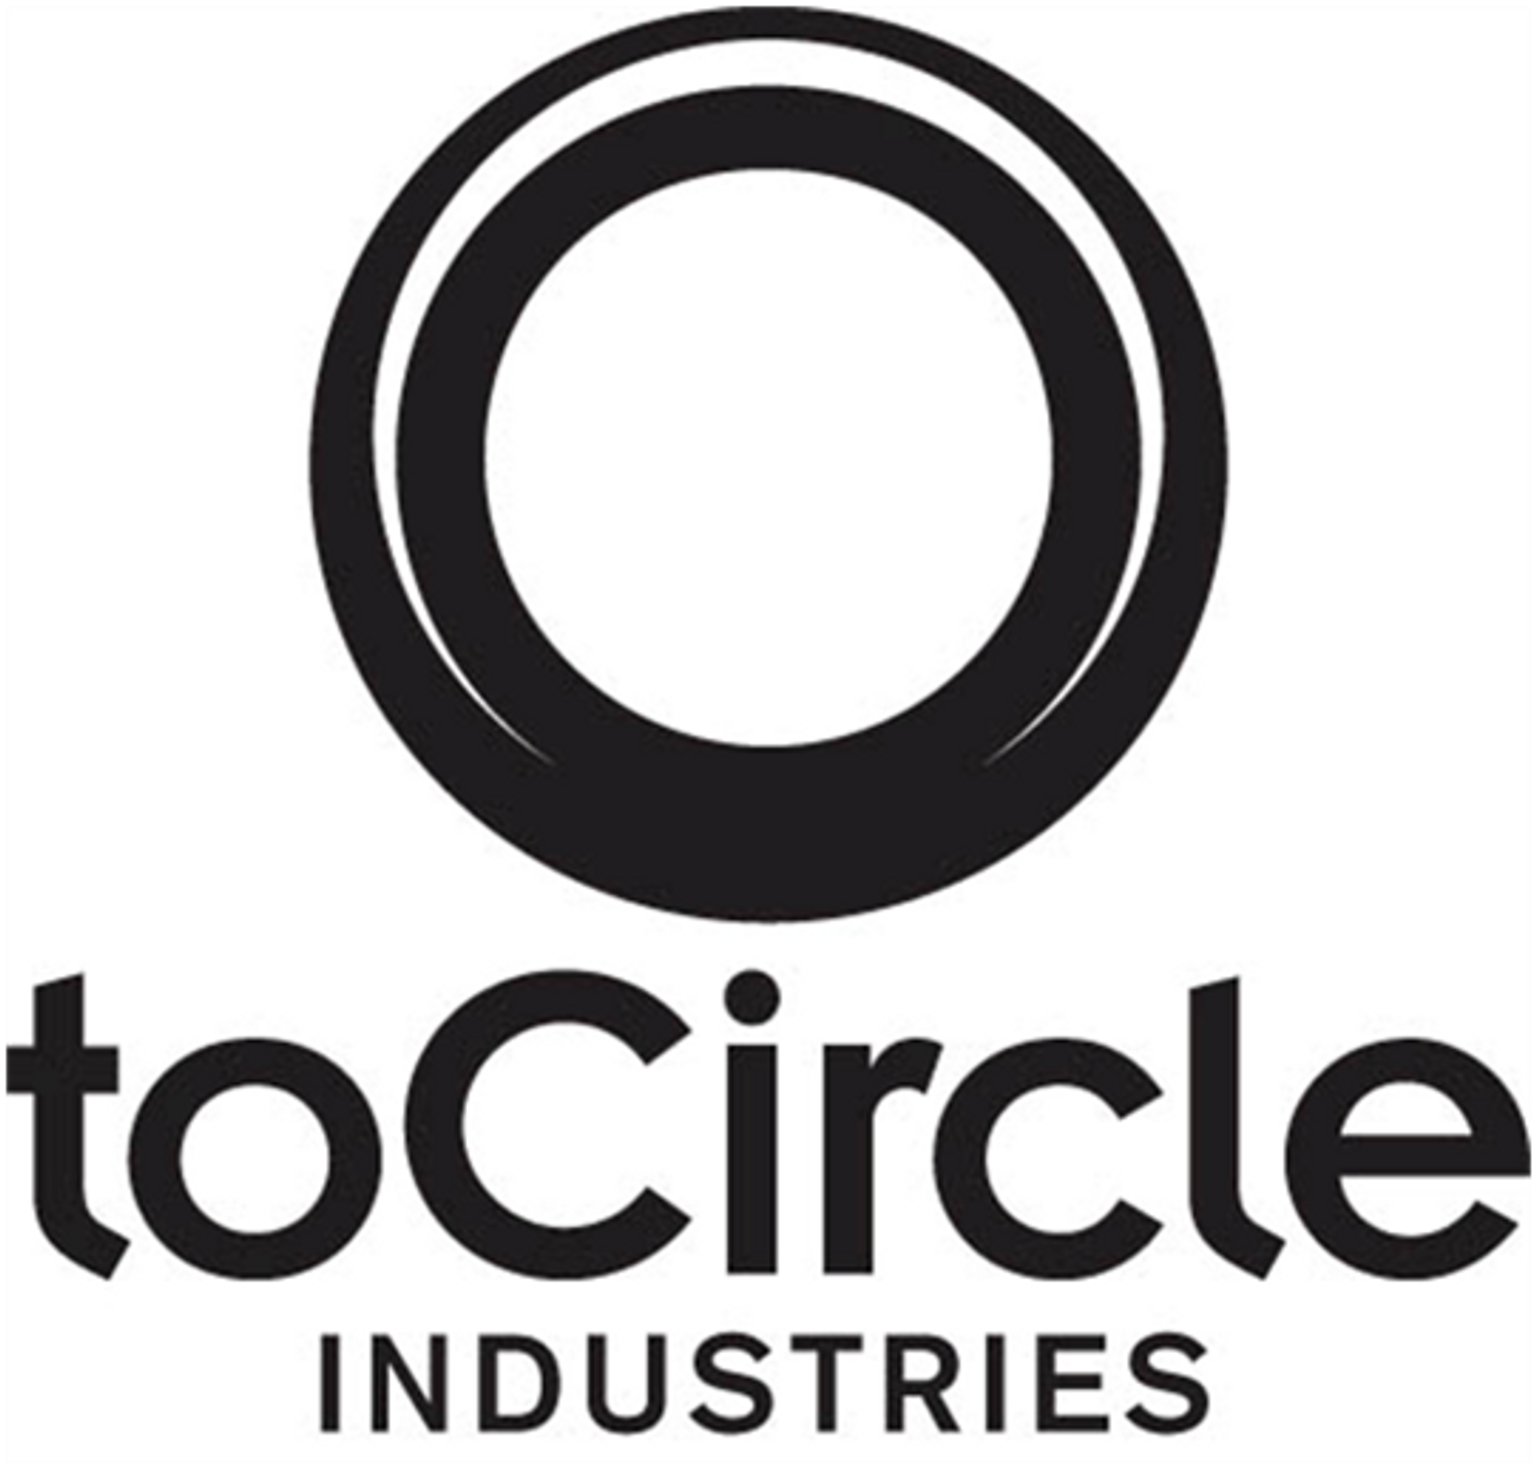 TOCIRCLE INDUSTRIES AS